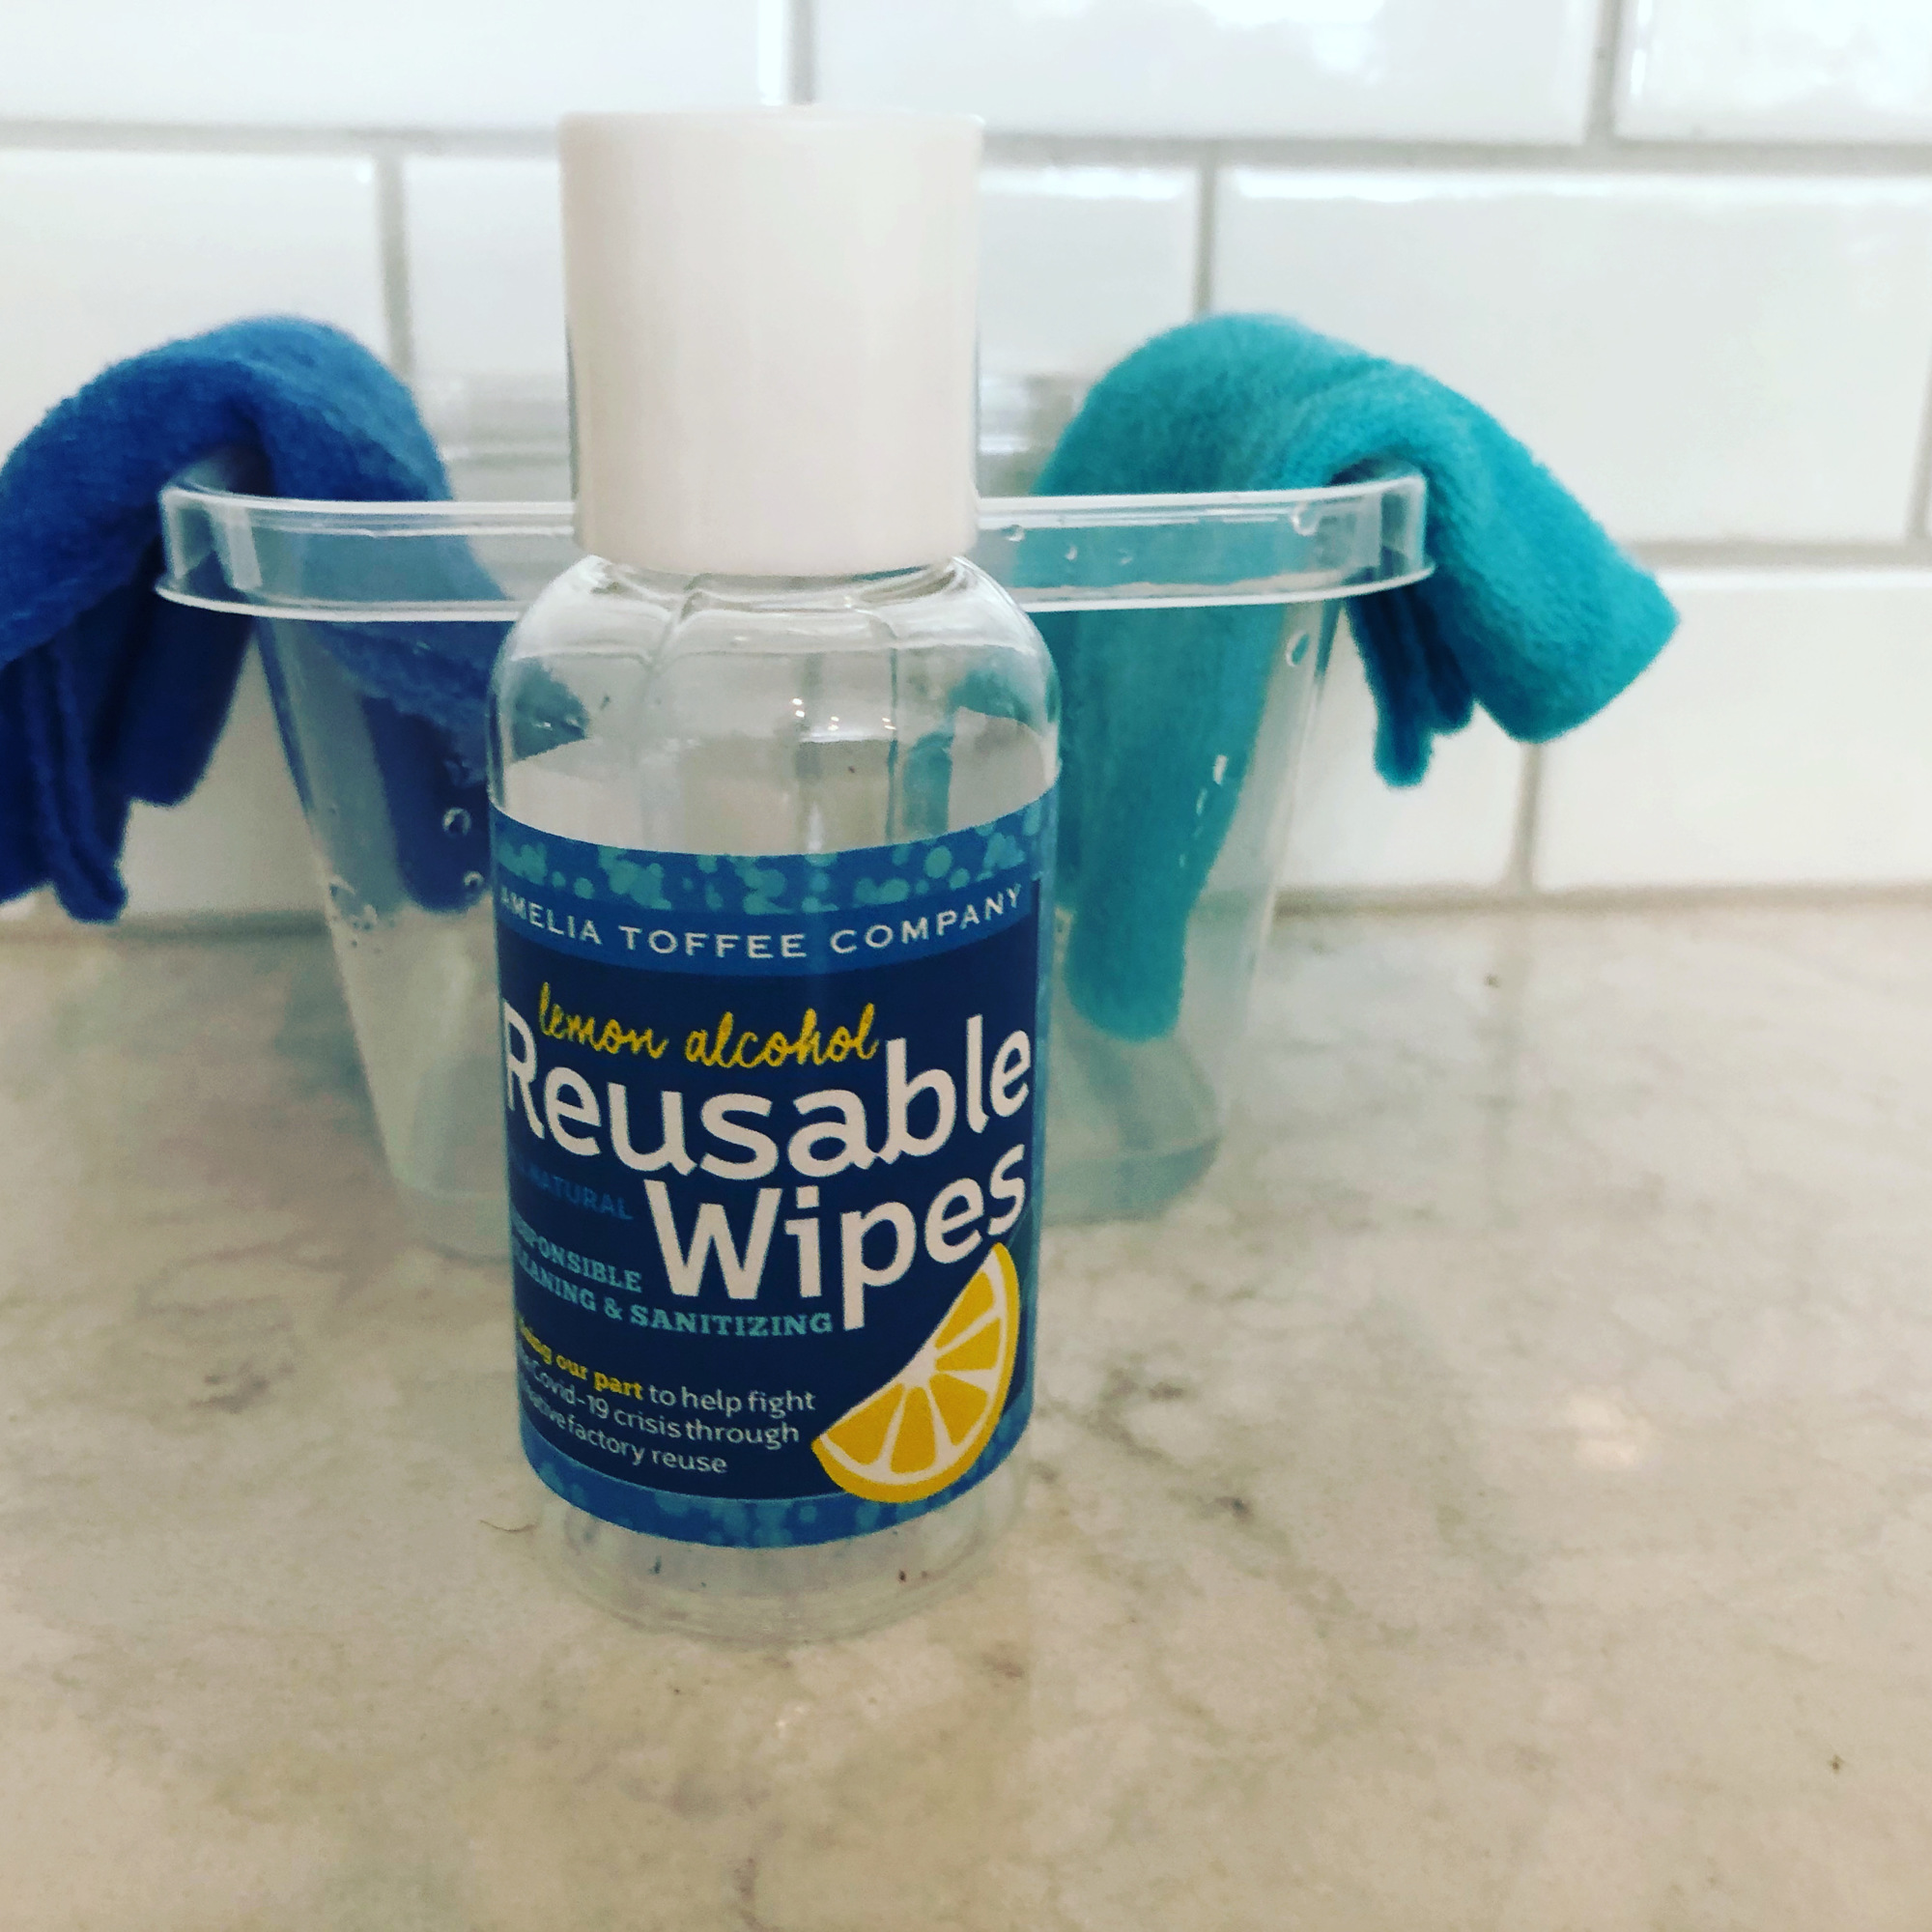 Reusable wipes from Ameila Toffee.